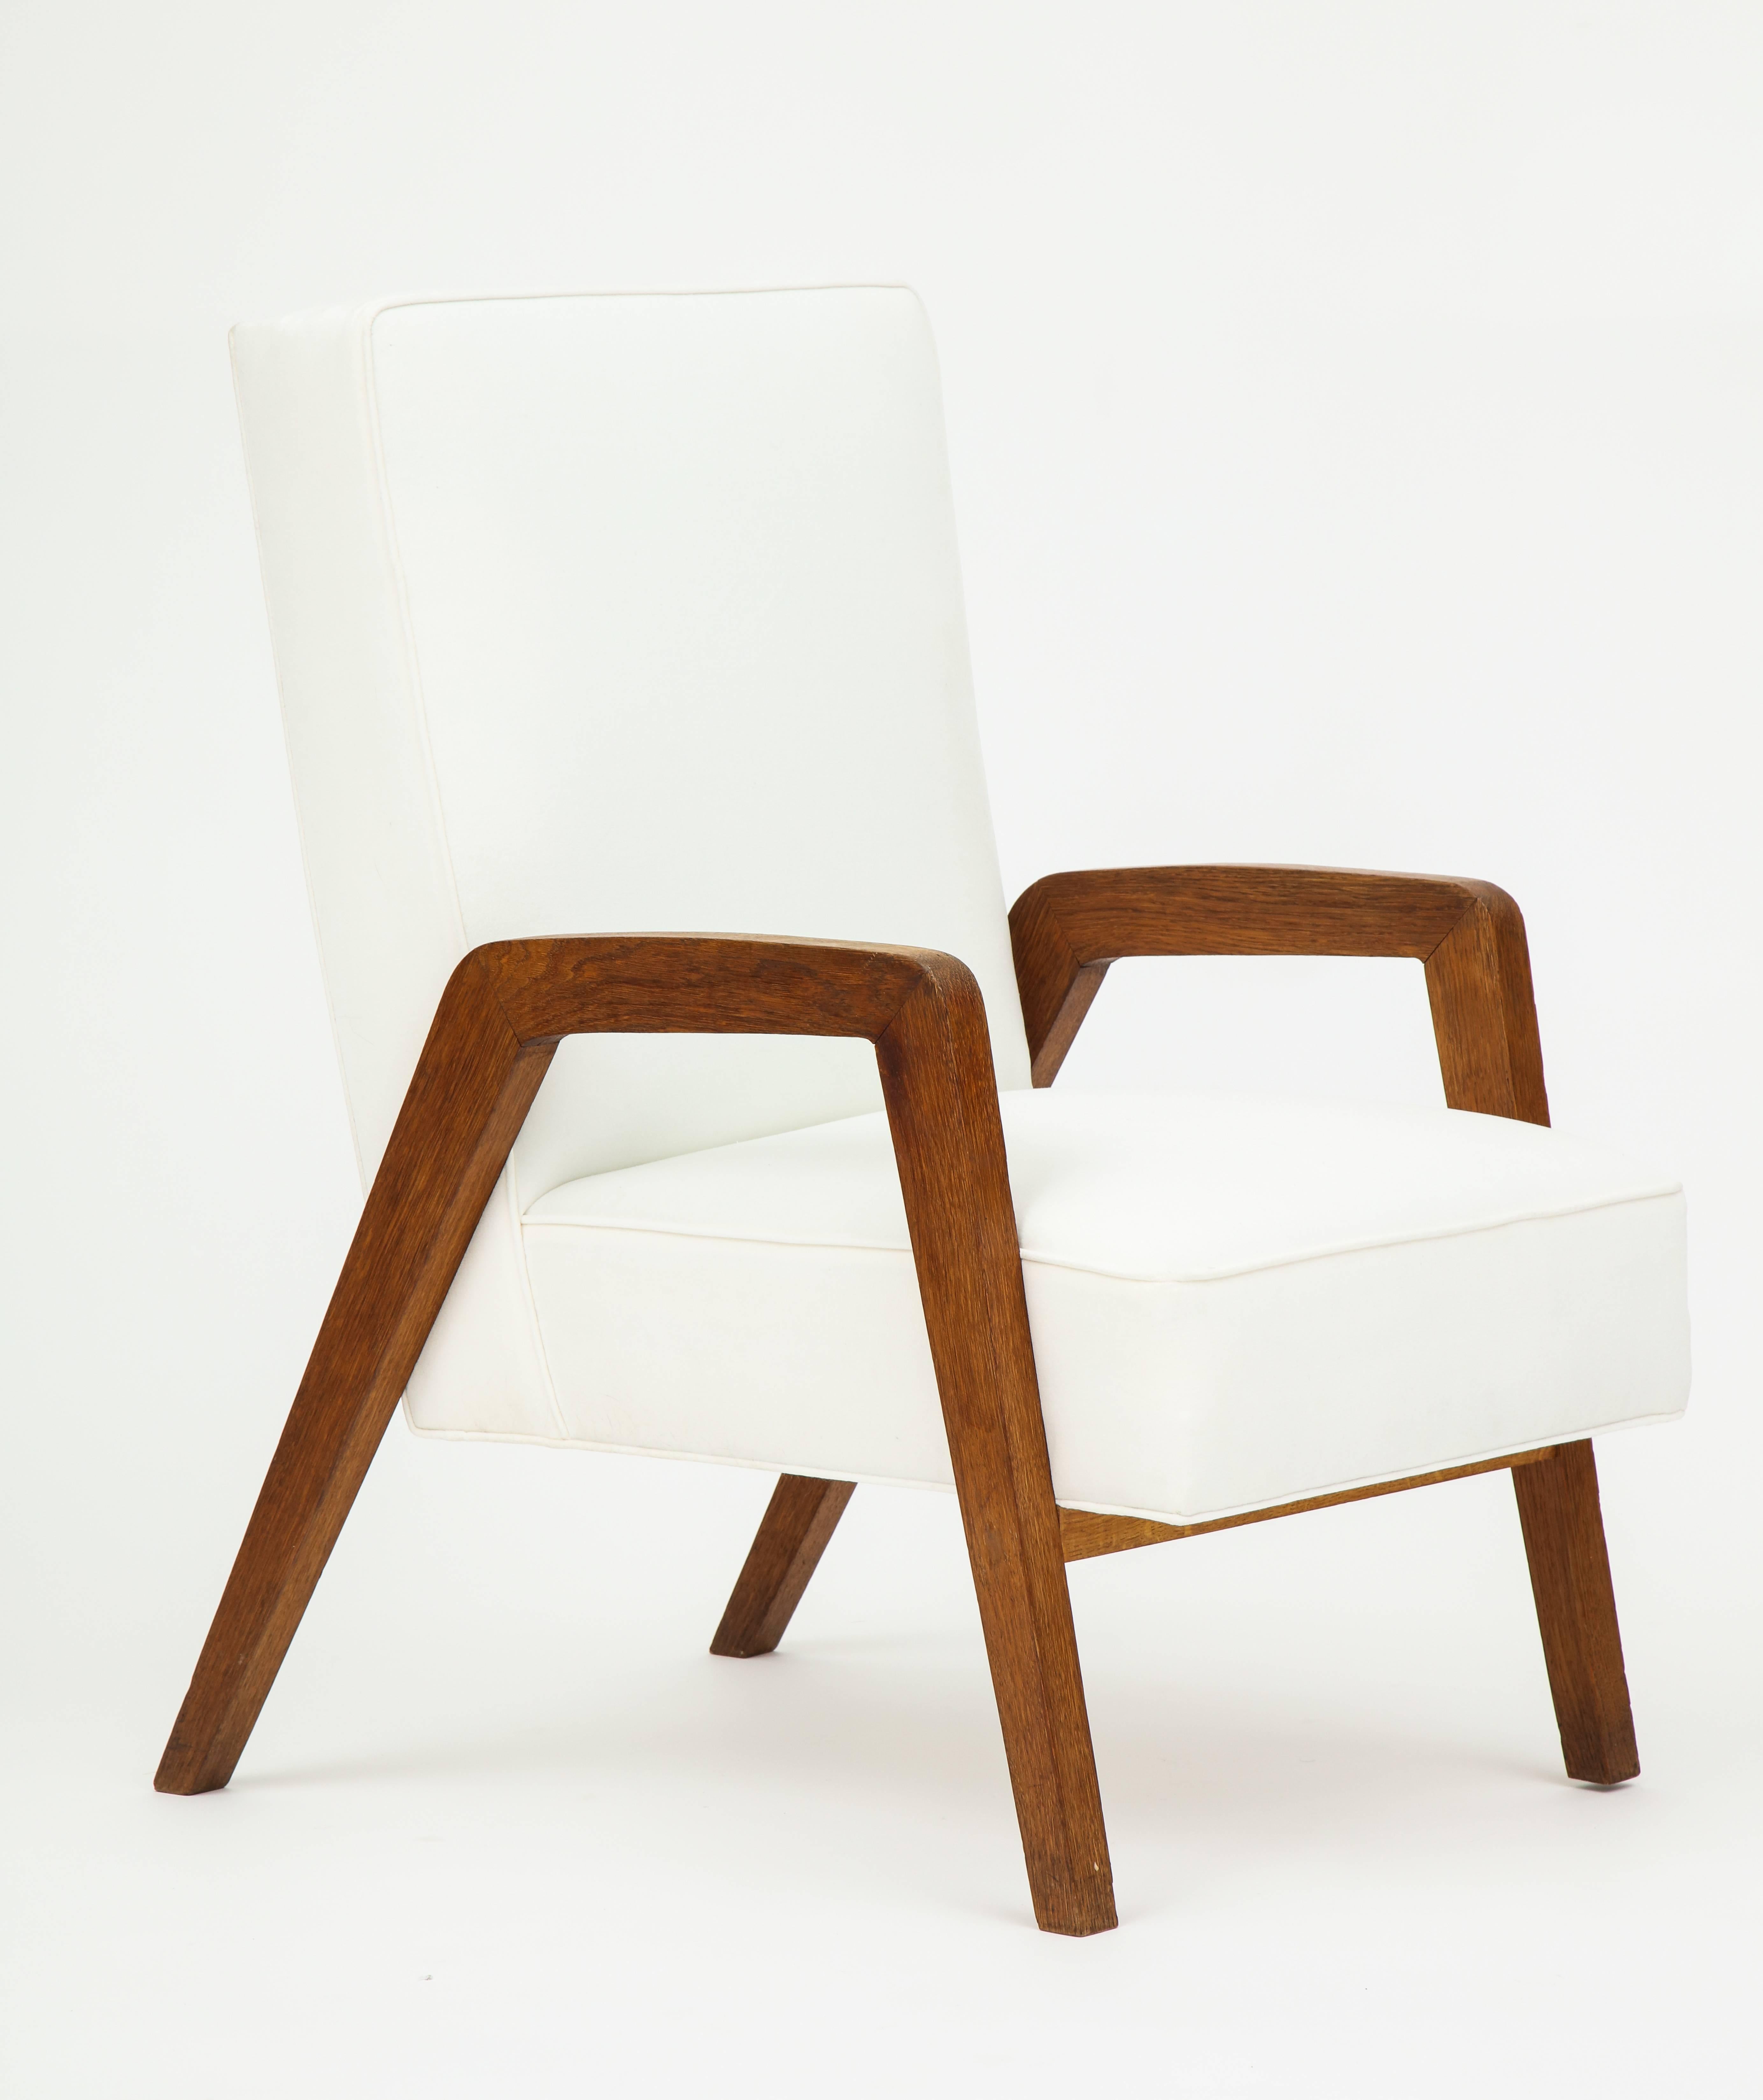 Midcentury Oak Velvet White Jeanneret Style Pair of Lounge Chairs France 1950s

Beautiful oak and velvet white lounge chairs with beautiful grain detail on the oak. The oak has the perfect amount of patina. Cool shape of the arms, reminiscent of